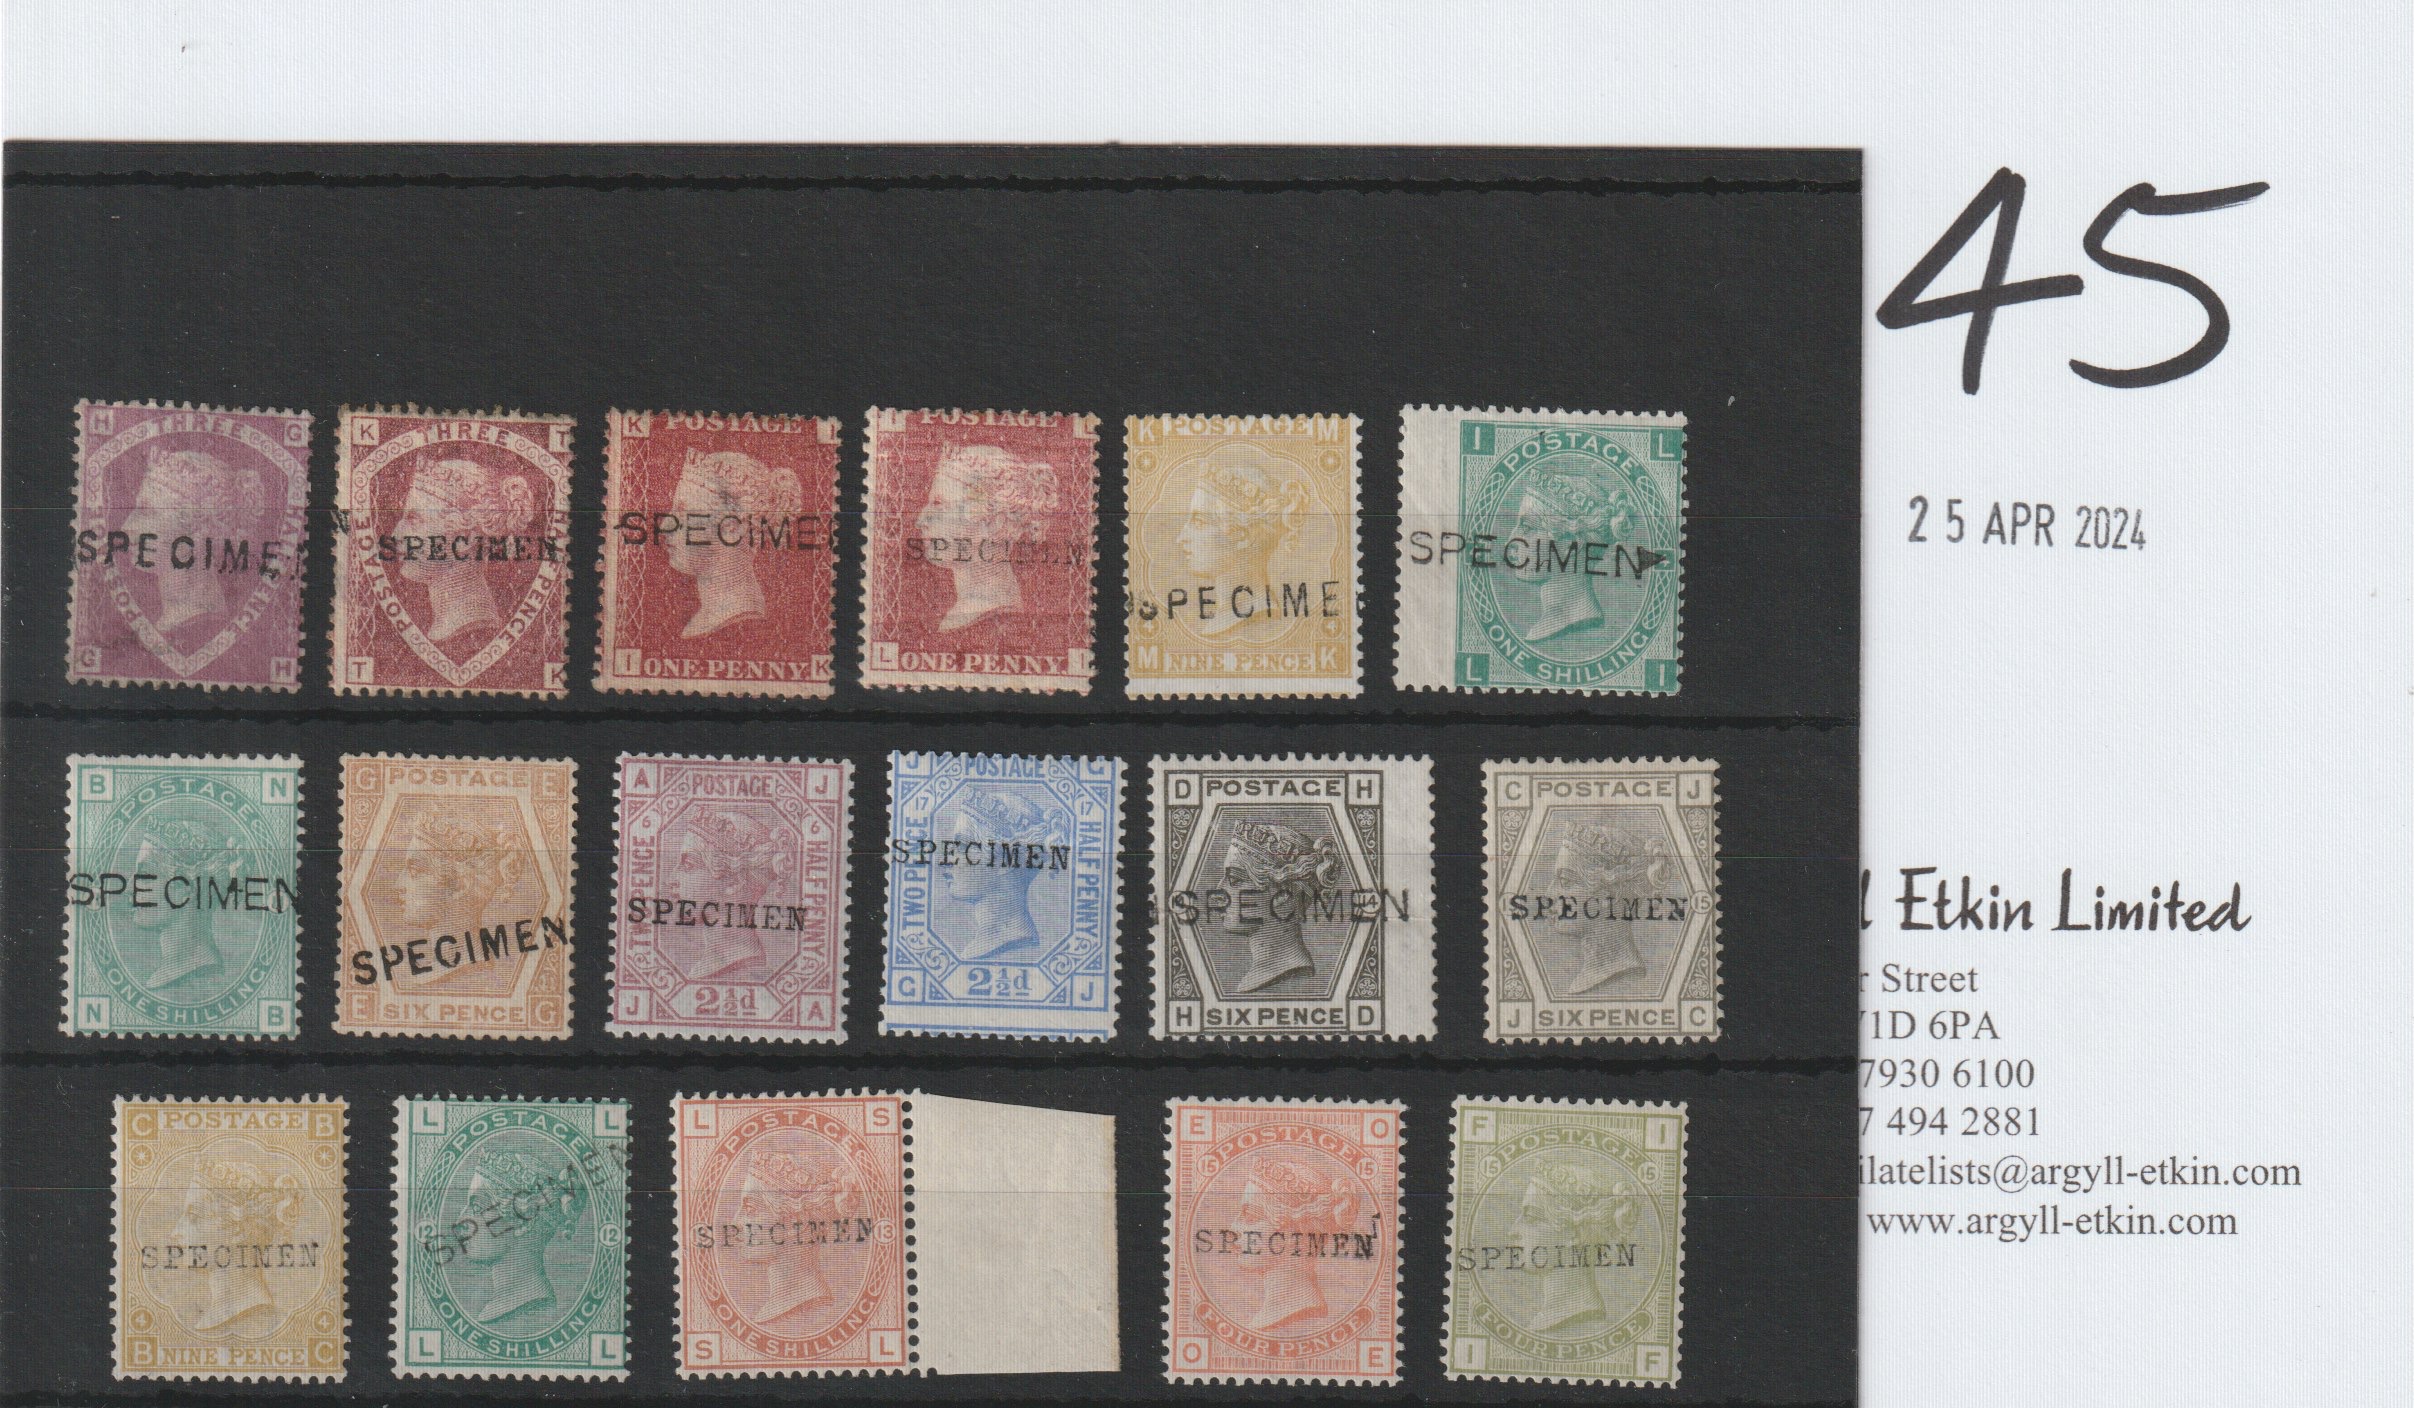 1864-80 Specimen stamps, the selection including 1864 1d red plate 146, 1867 9d straw, 1876 2½d rosy